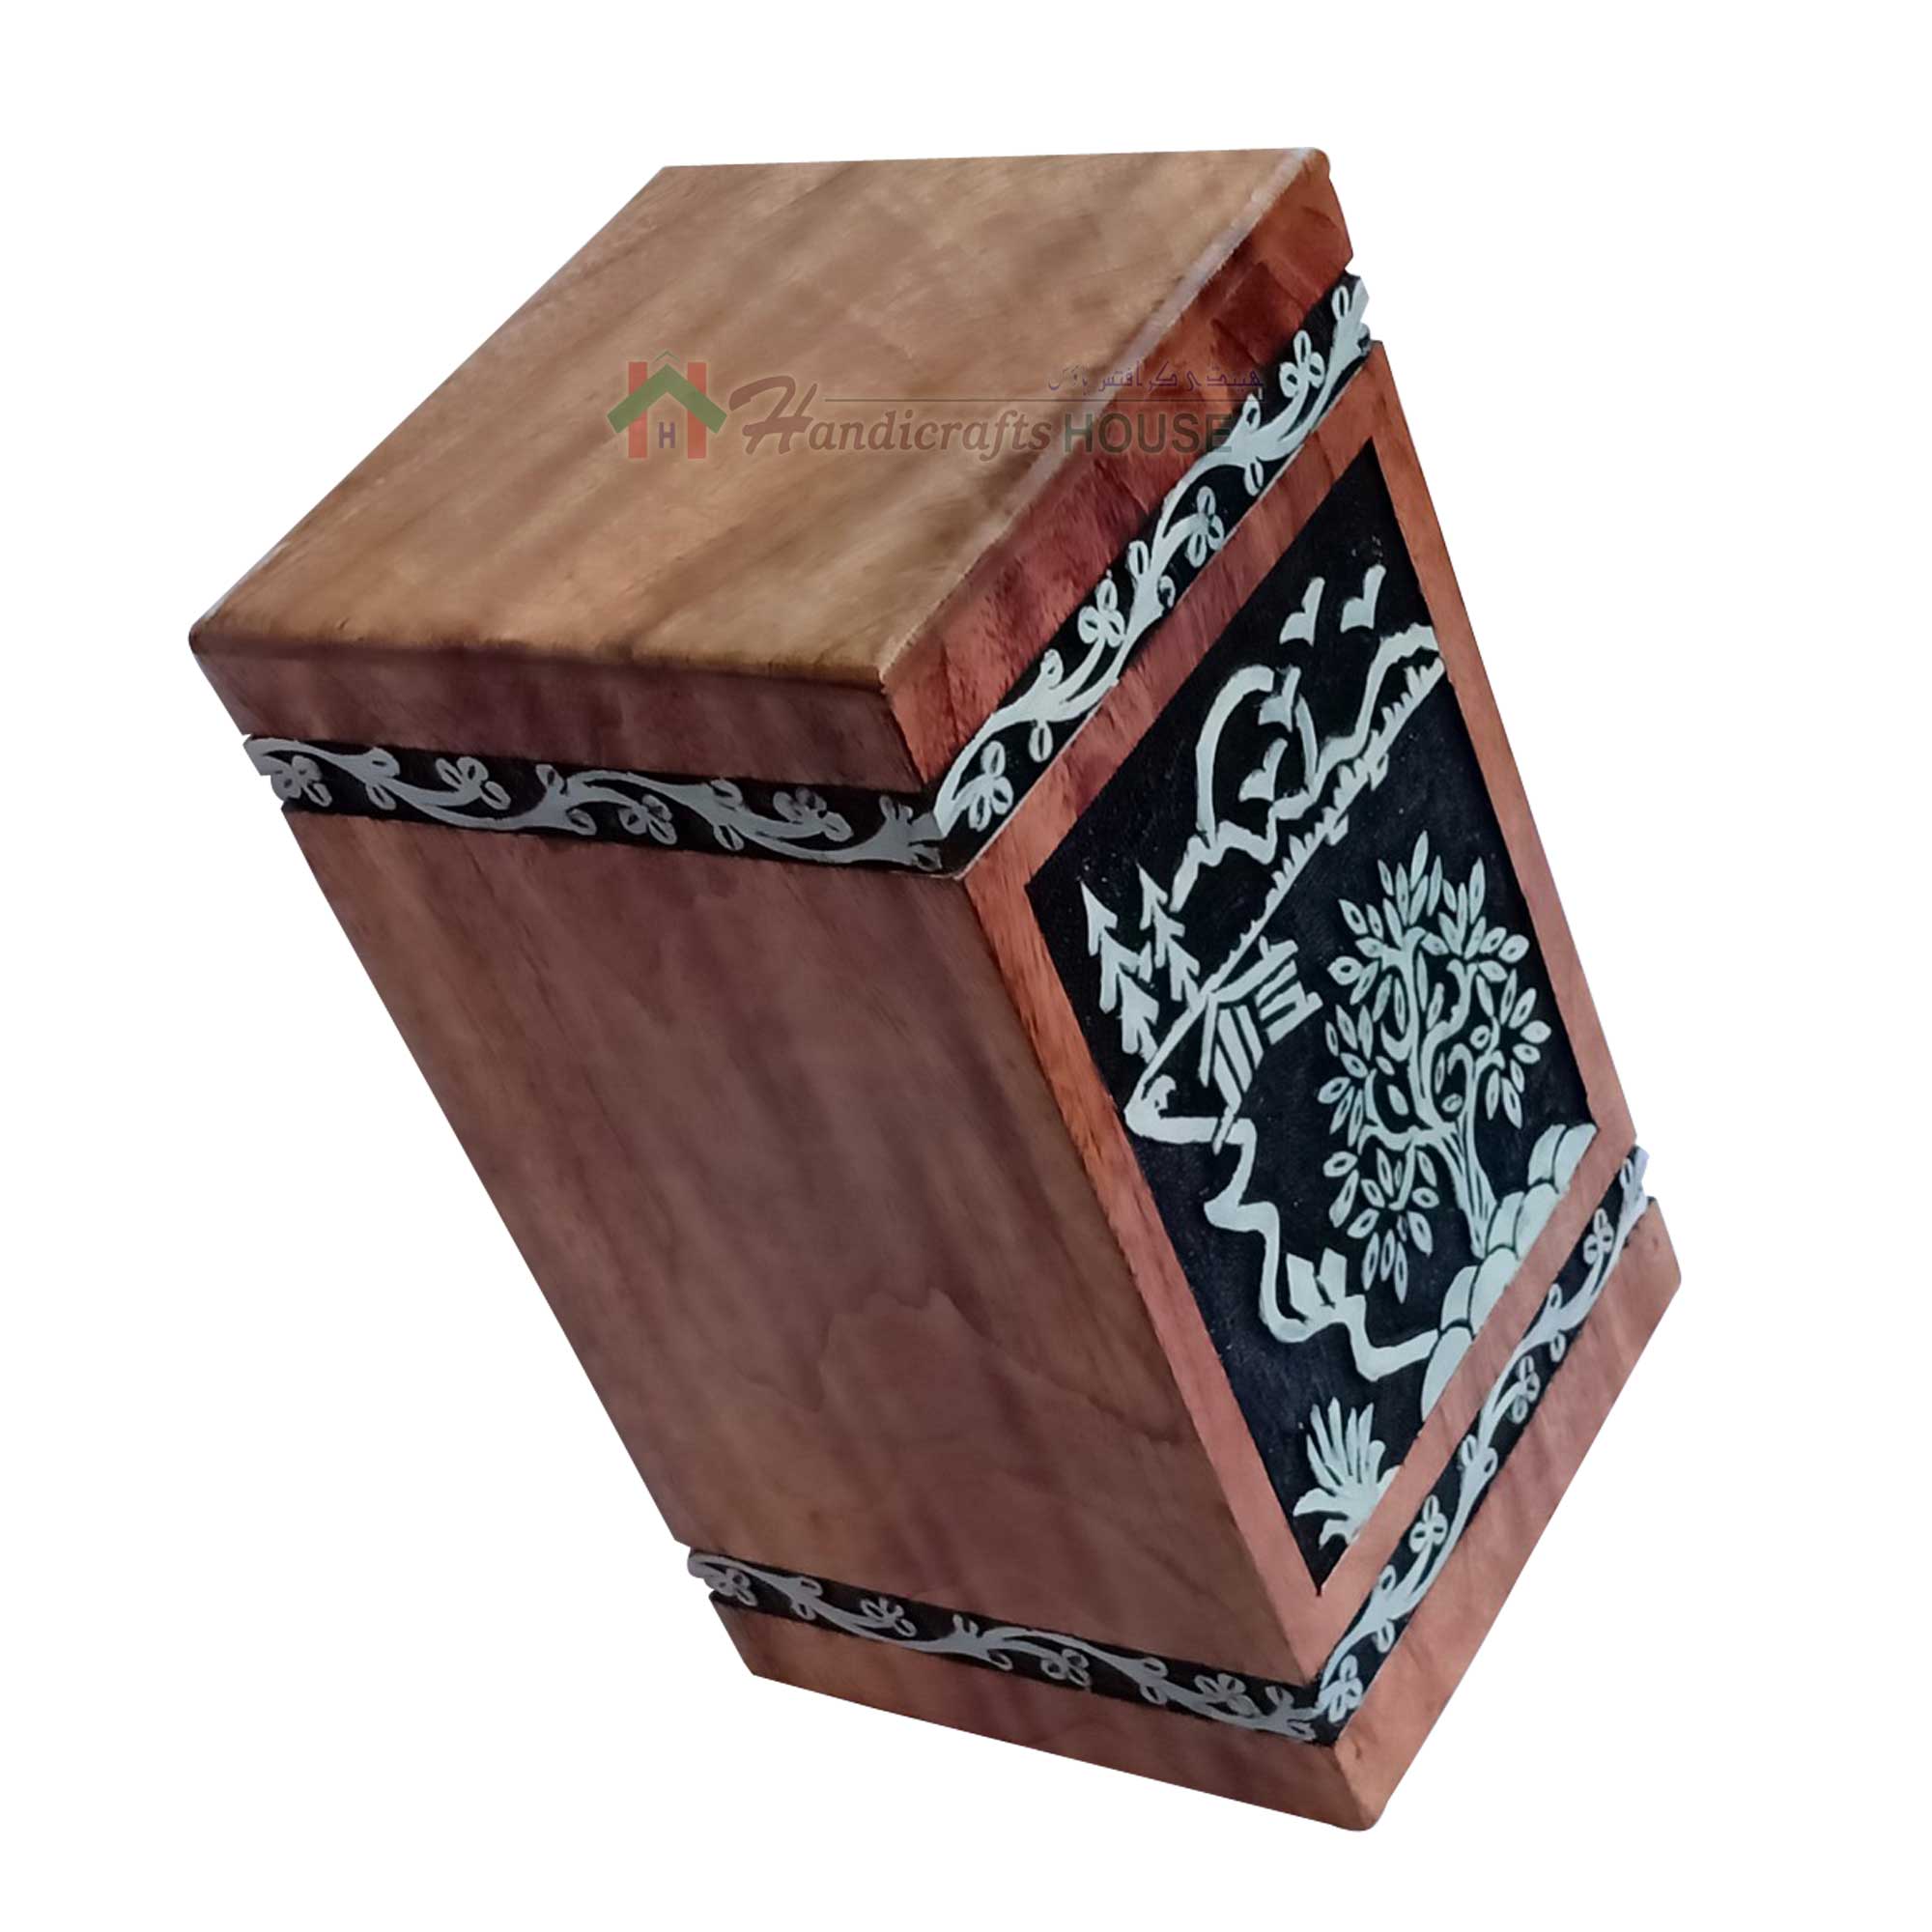 Wood Cremation Keepsake Urn For Sale, Timber Box, Wooden Funeral Adult Urns, Decorative Tower Boxes